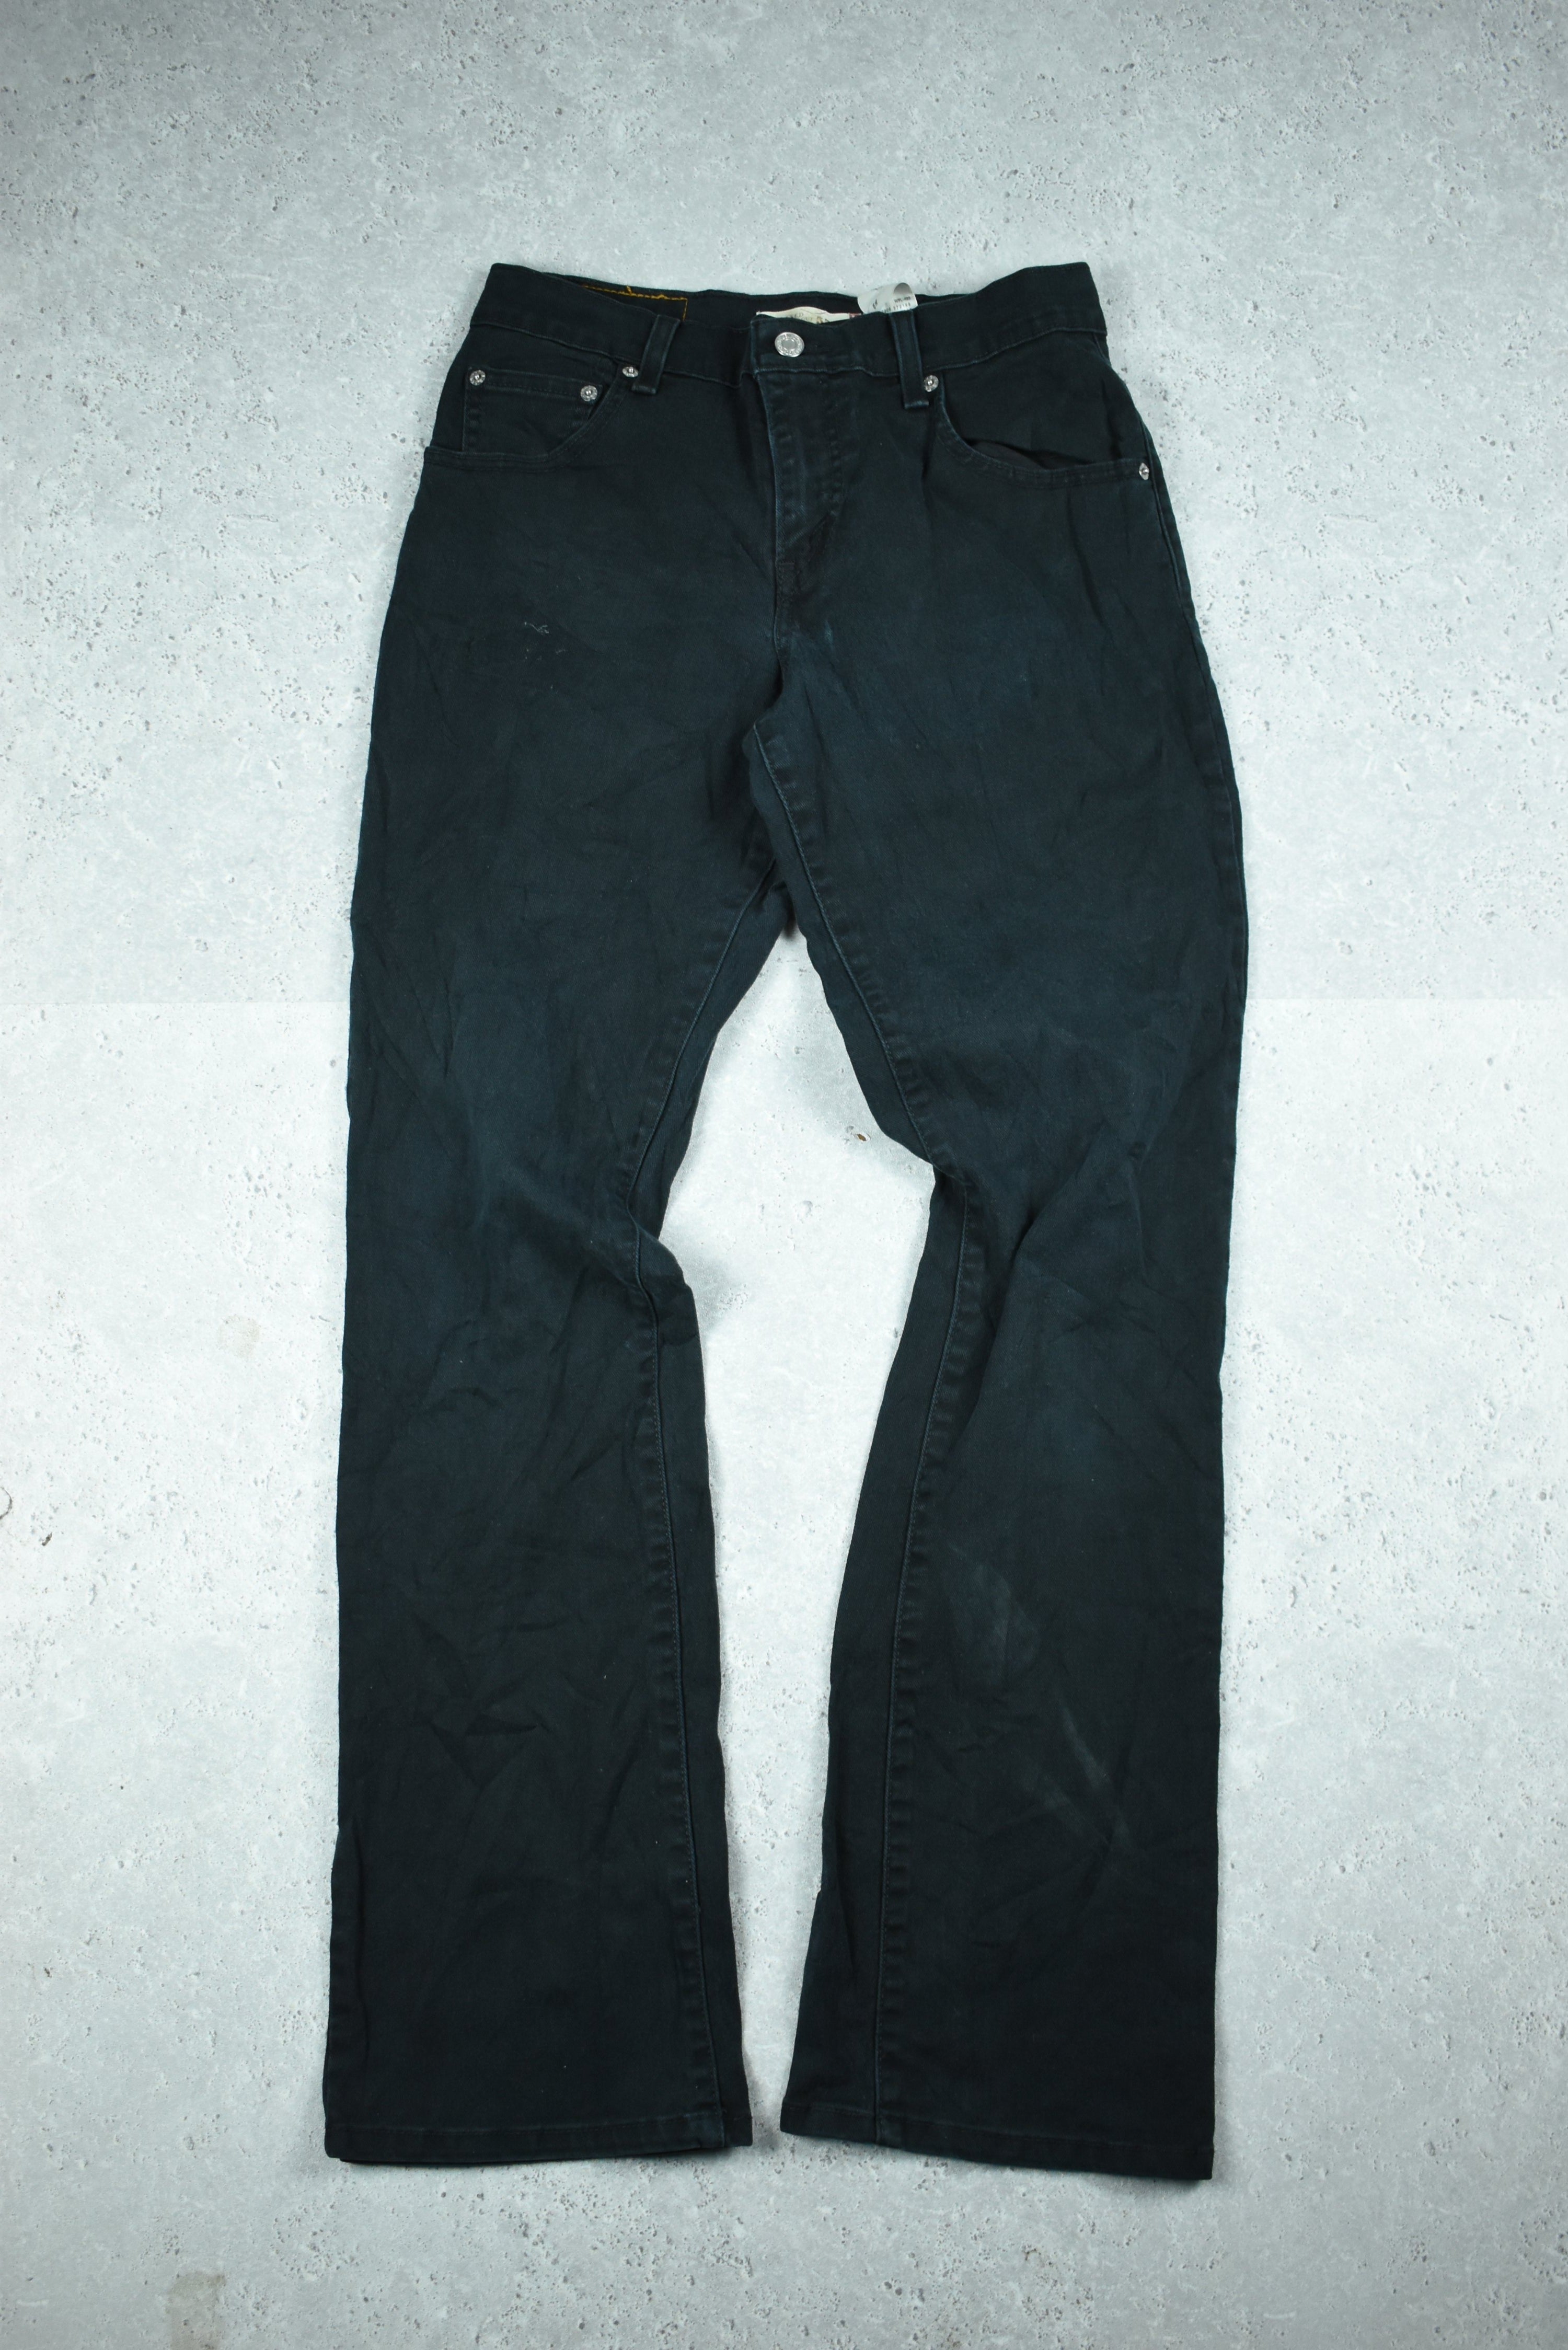 Vintage Levis Womens 550 Black Jeans Relaxed Boot Cut Size 6